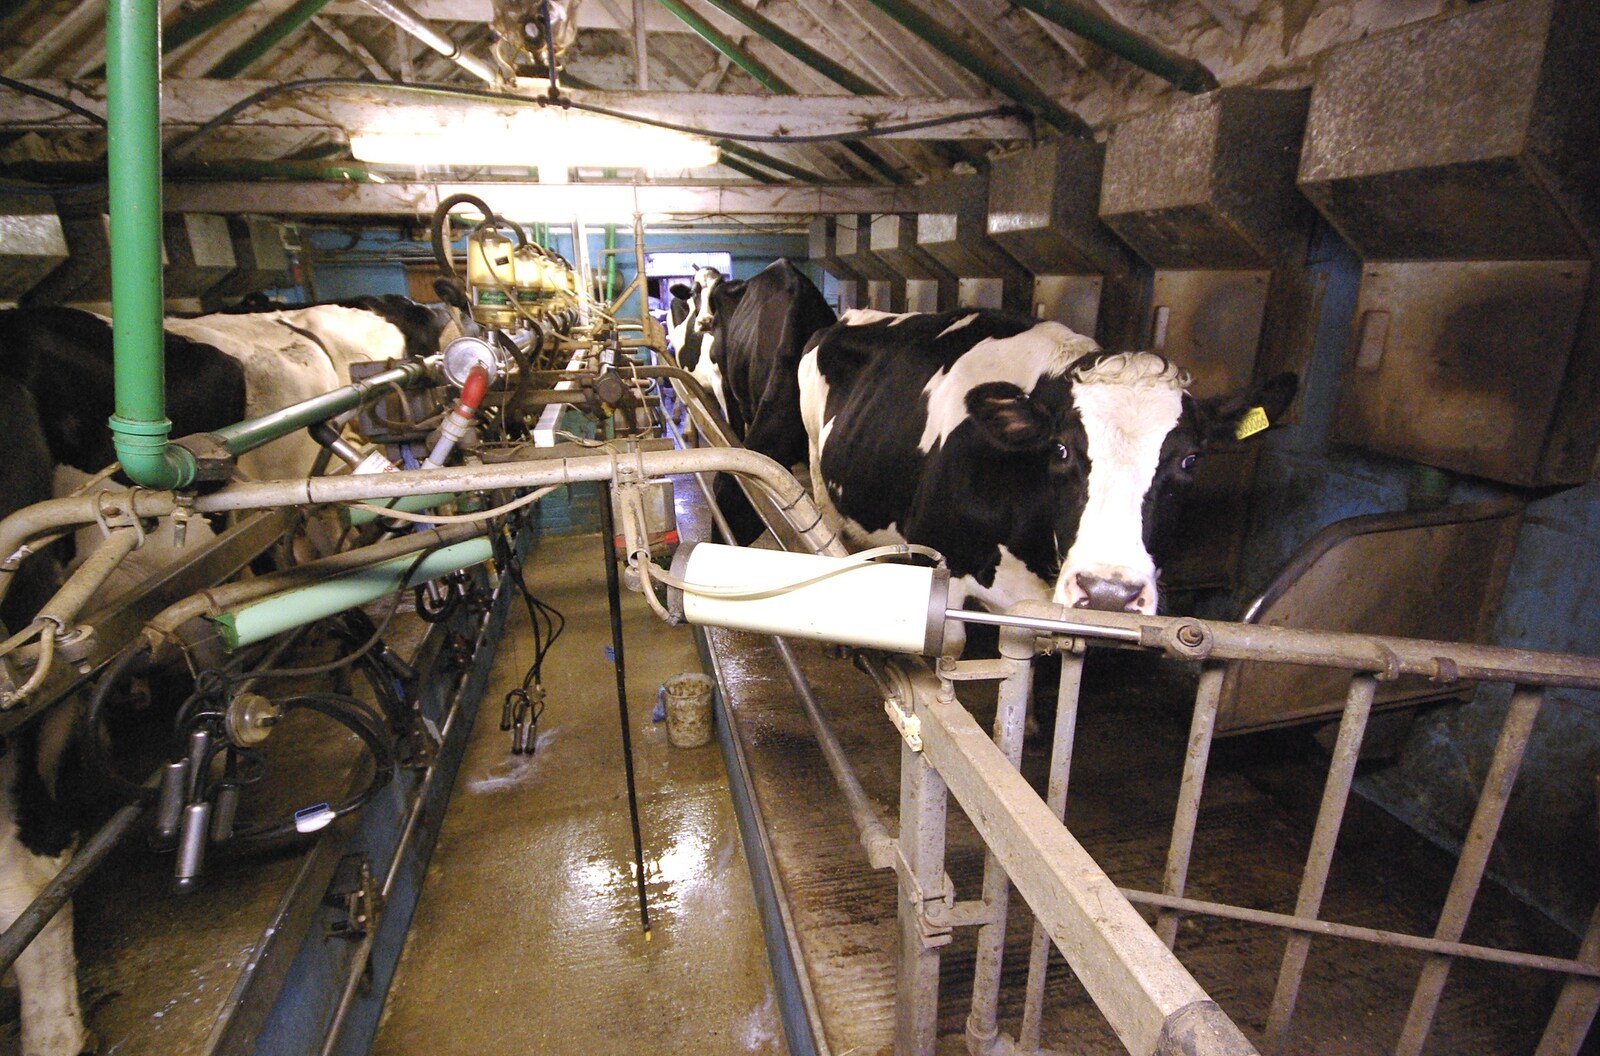 Cows in milking stalls from The Last Milking at Dairy Farm, Thrandeston, Suffolk - 11th January 2007